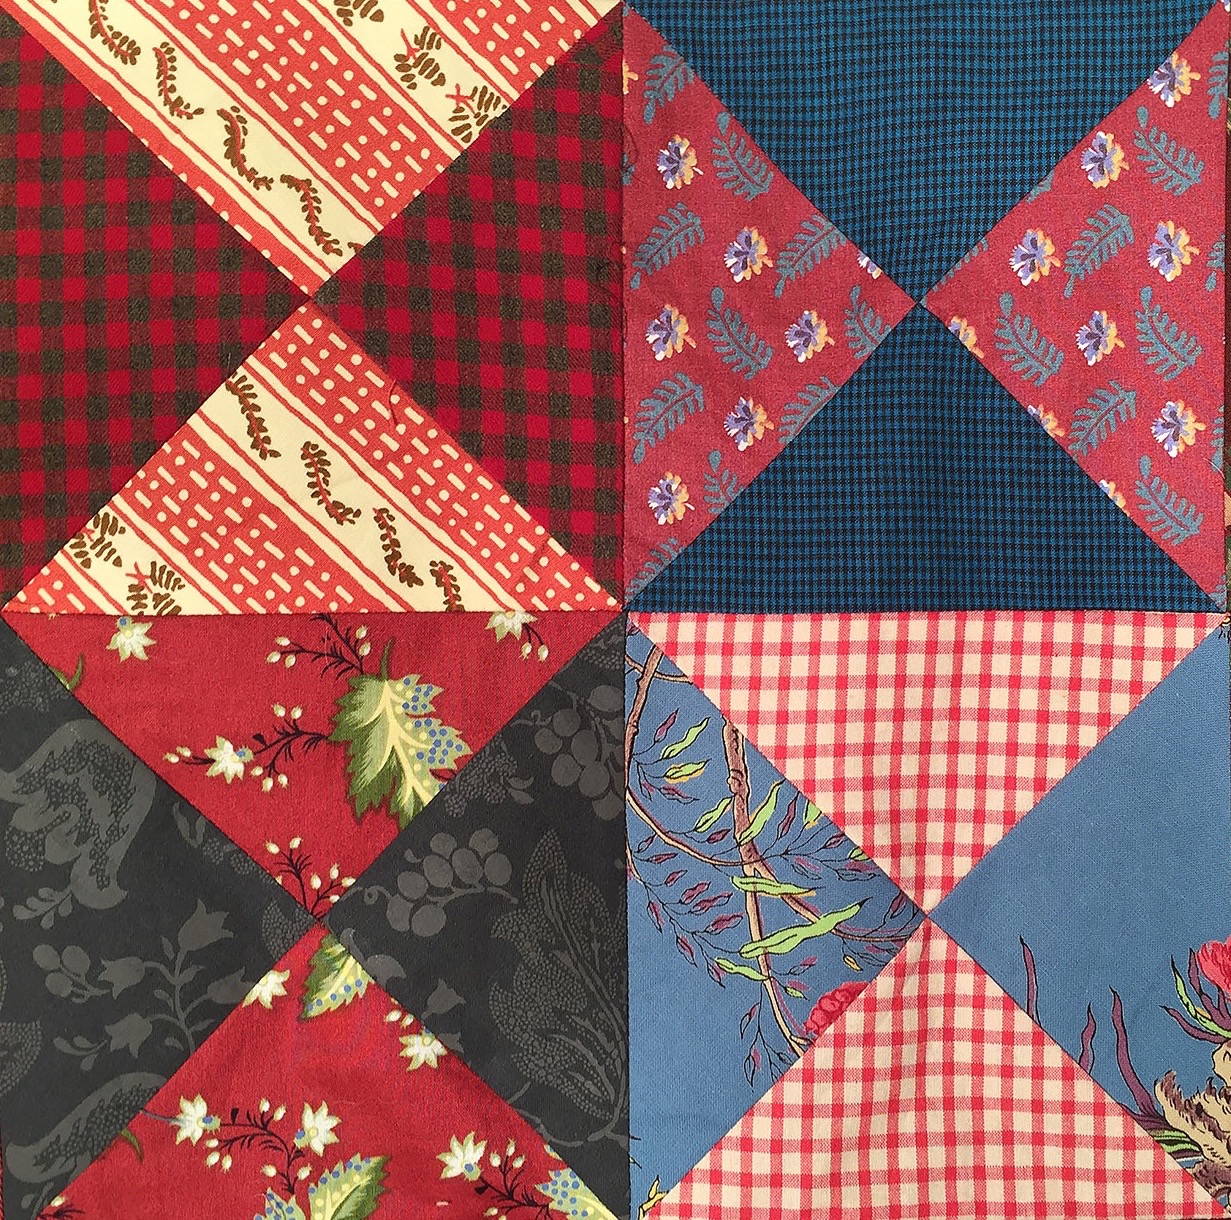 nifty quilts: The French Connection